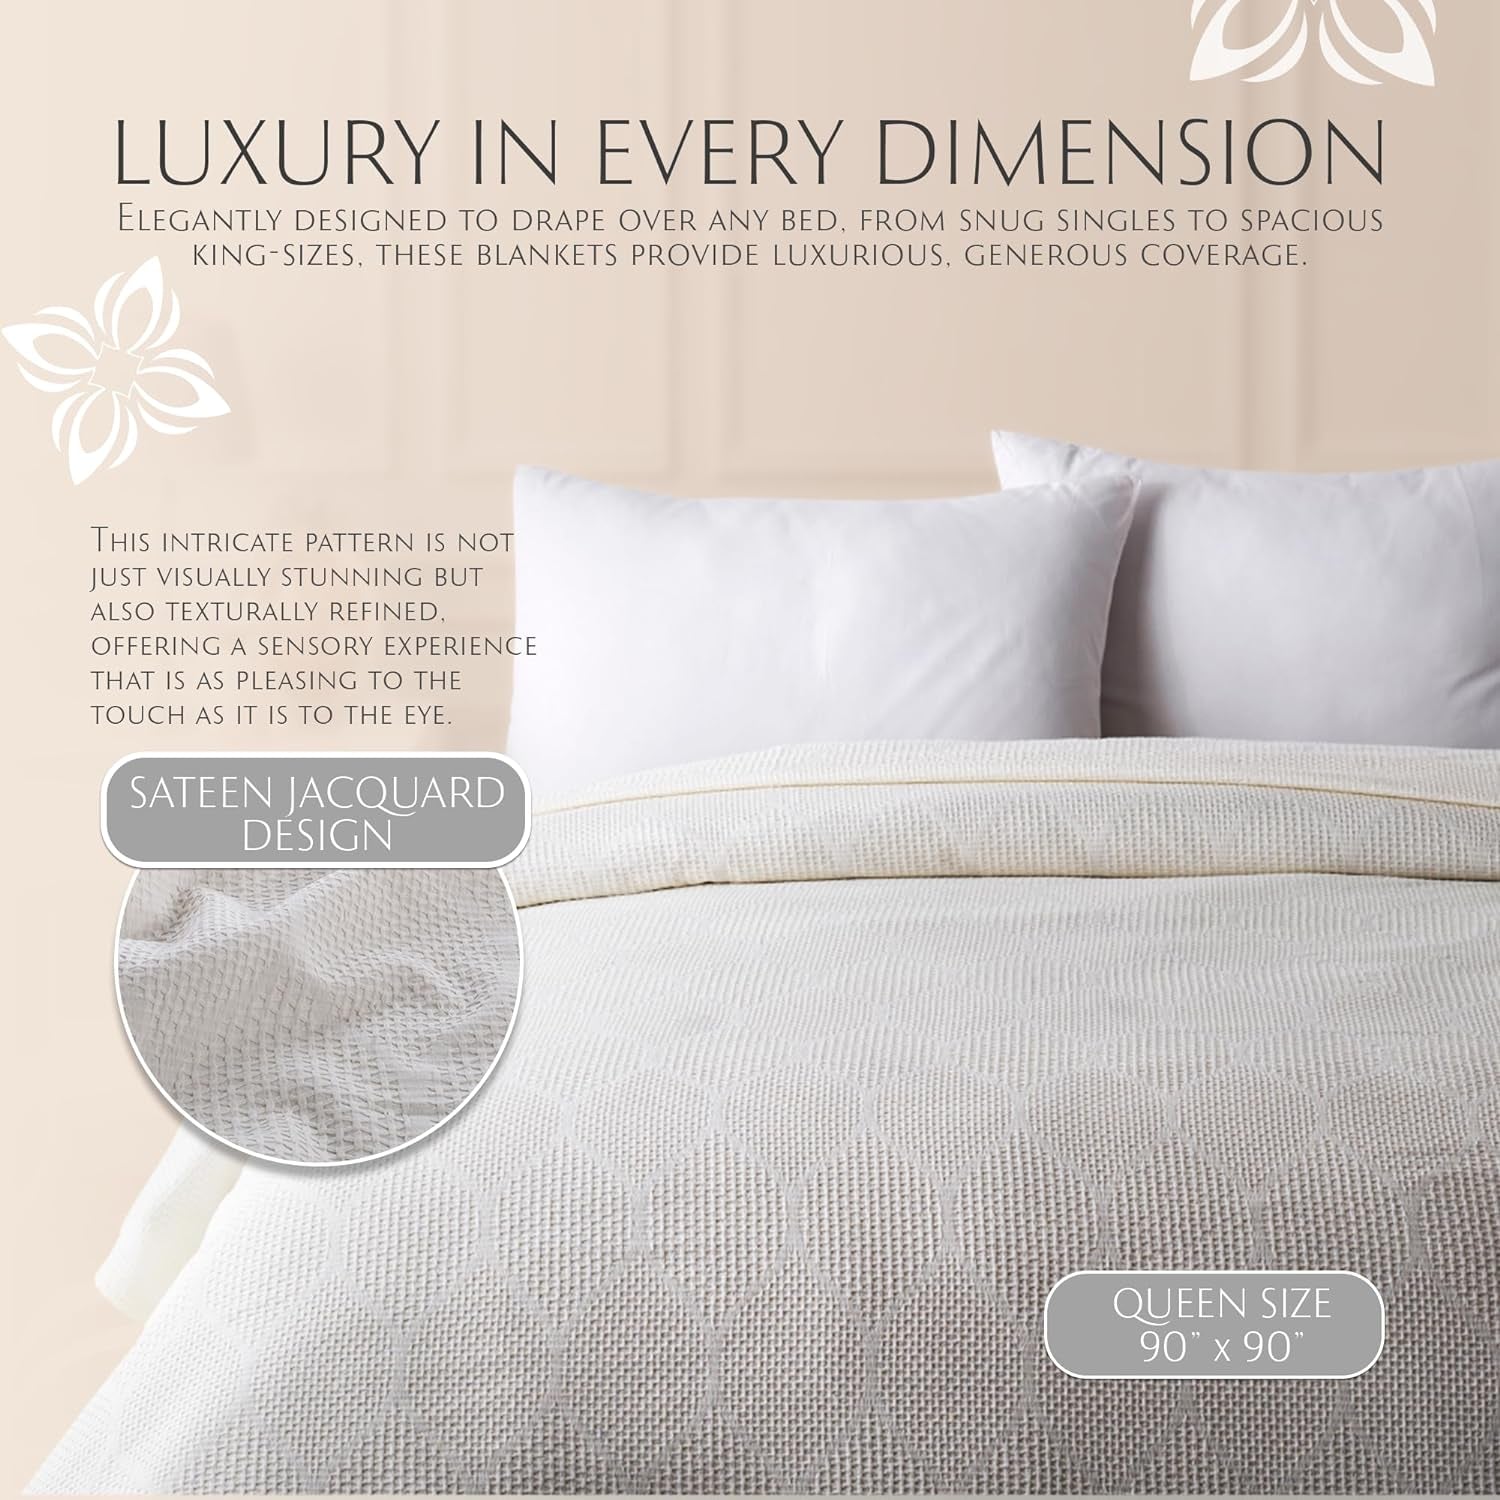 Thin Lightweight Cotton Blankets Skin-Friendly, Breathable, and Fade-Resistant - Modern Bedding Essentials for Year-Round Comfort, Style, and Quality Sleep Experience. Full/Queen 90”X 90”- Ivory